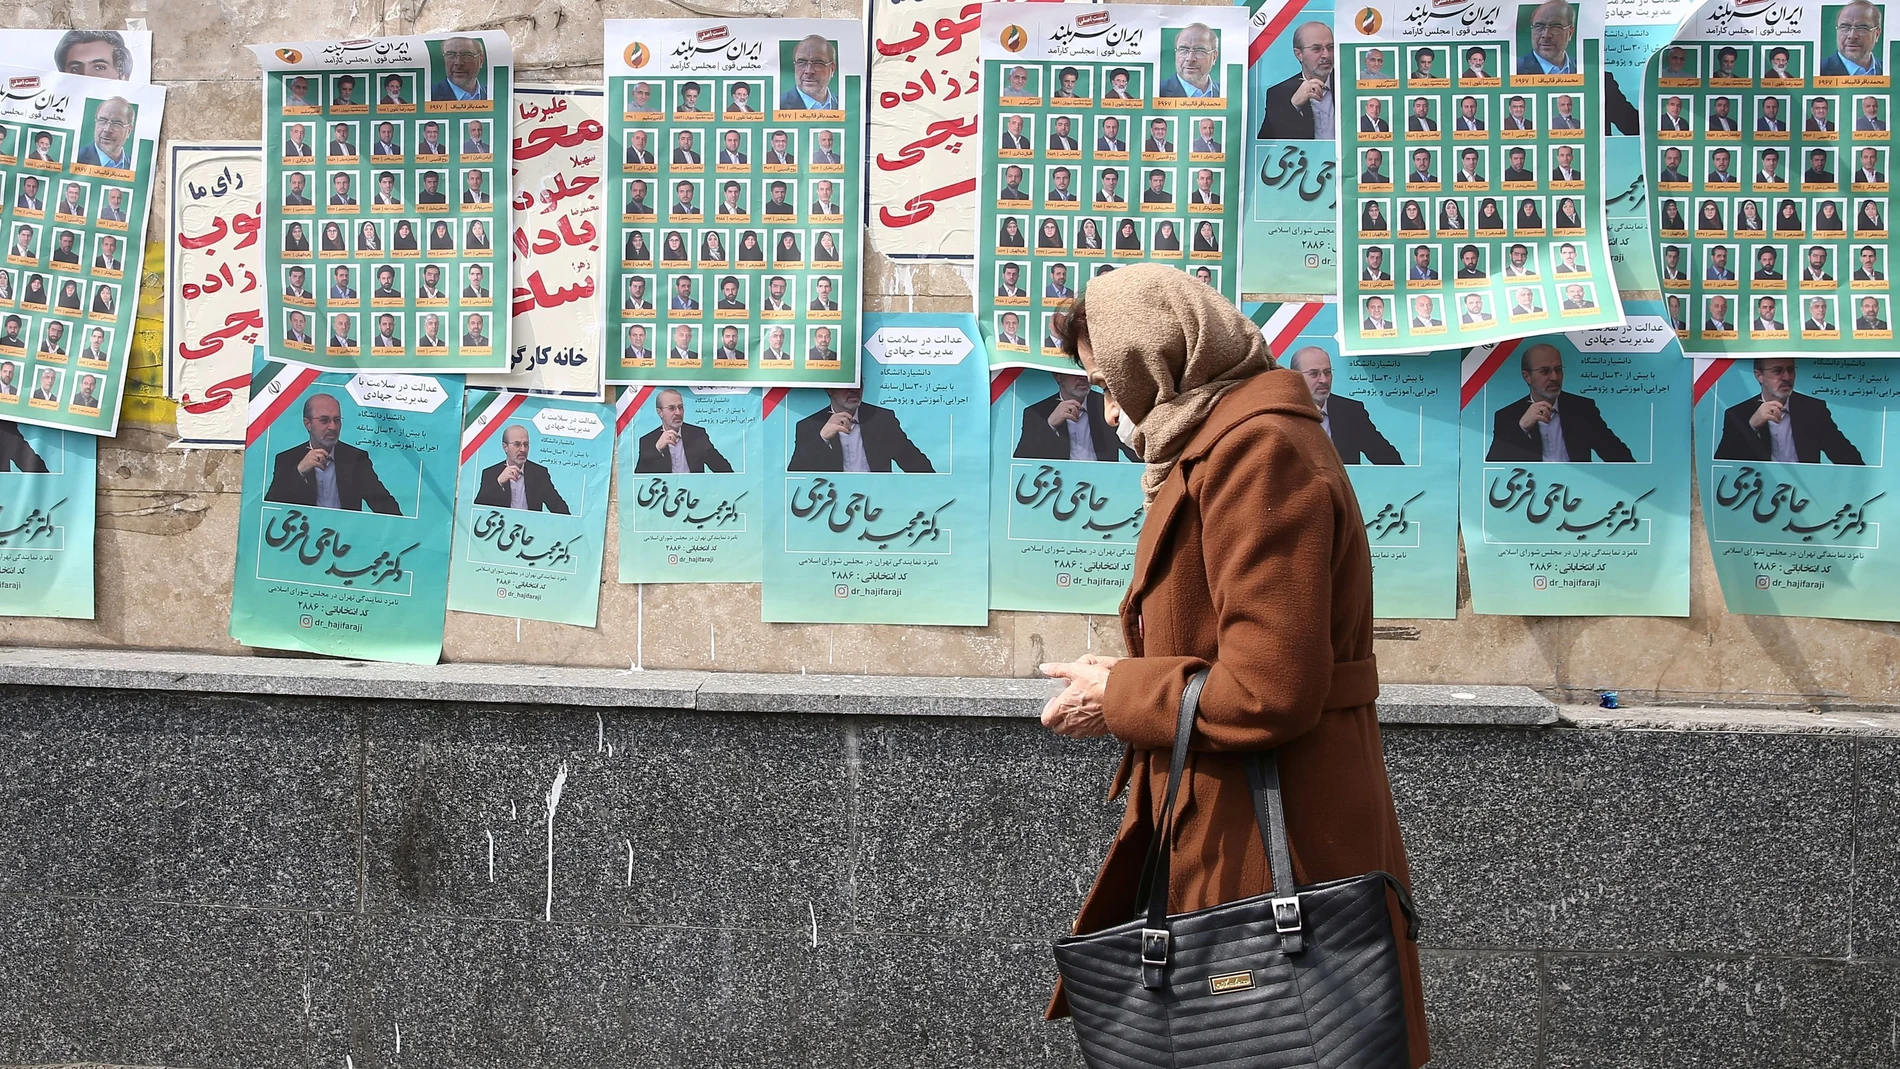 A woman walks past parliamentary election campaign posters in Tehran